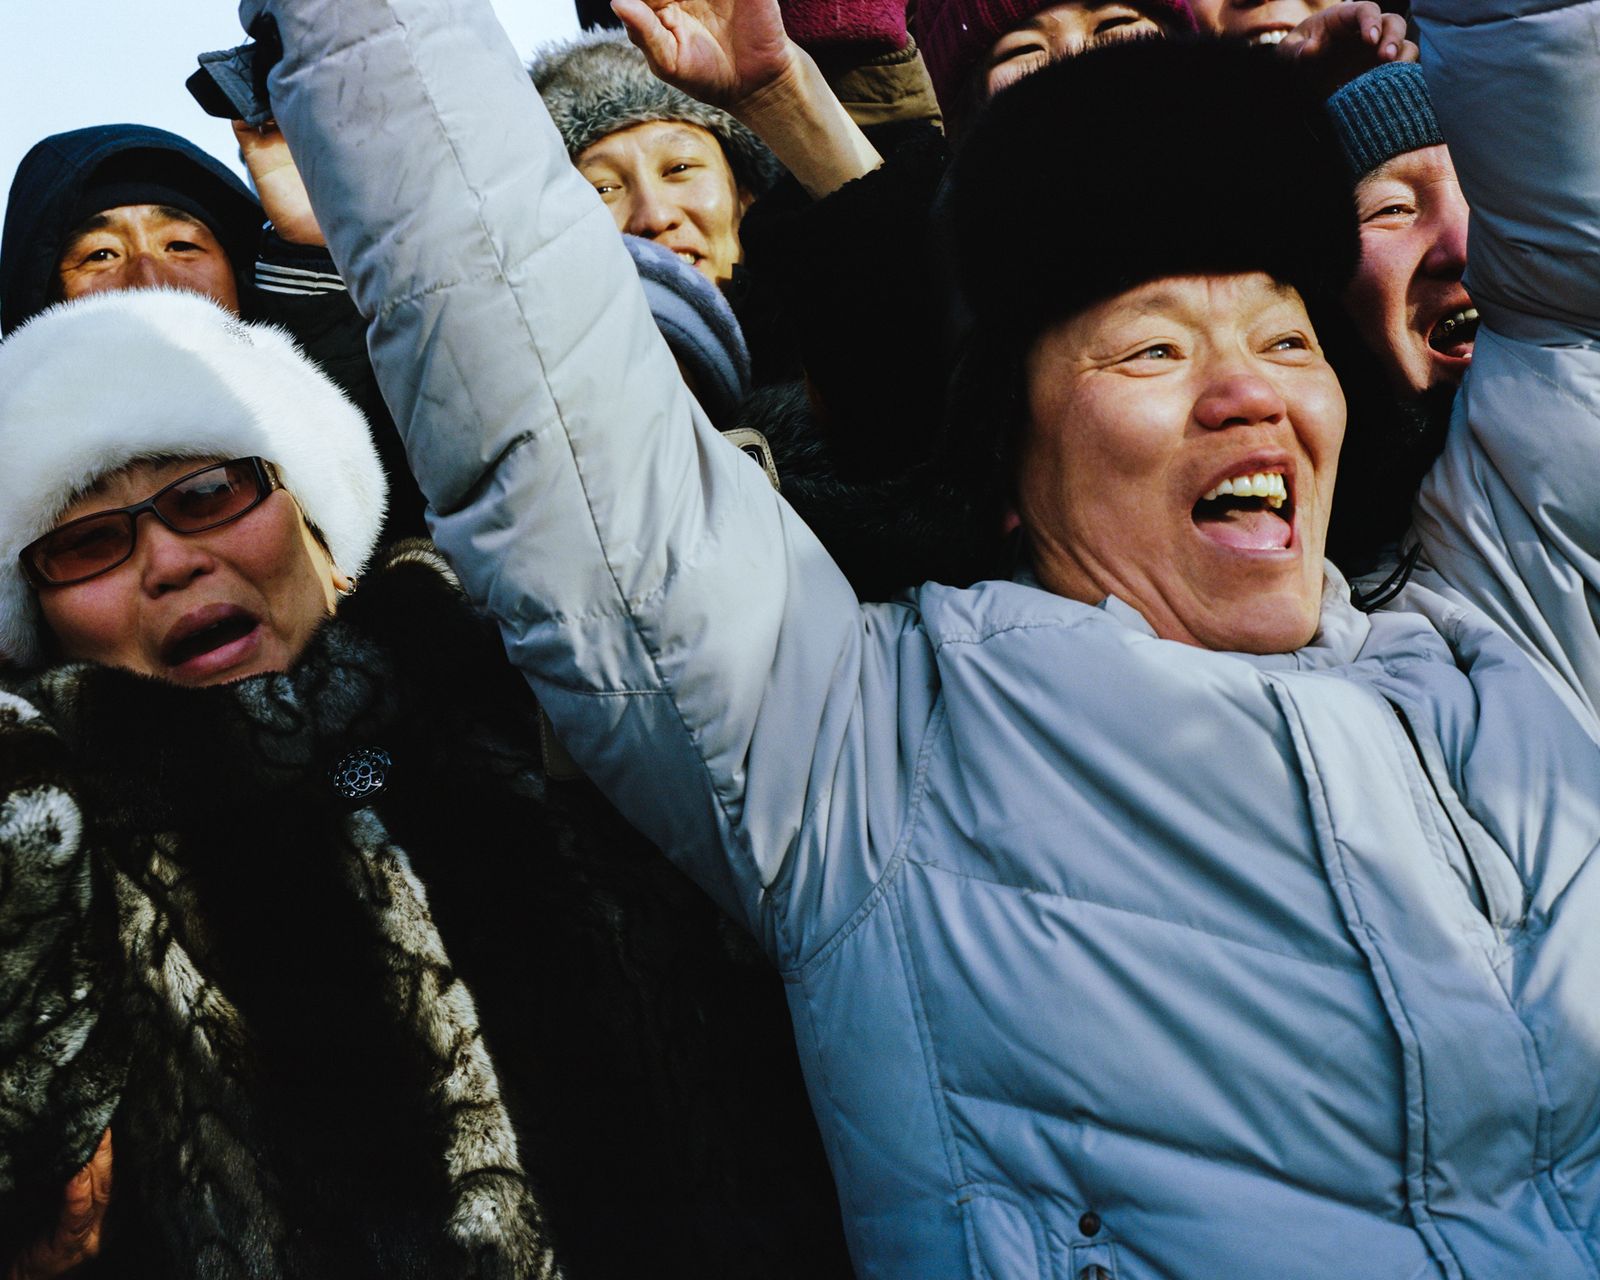 © alexis pazoumian - The fans are thrilled; the winners receive money or sometimes snowmobiles. From Yakutsk © Alexis Pazoumian